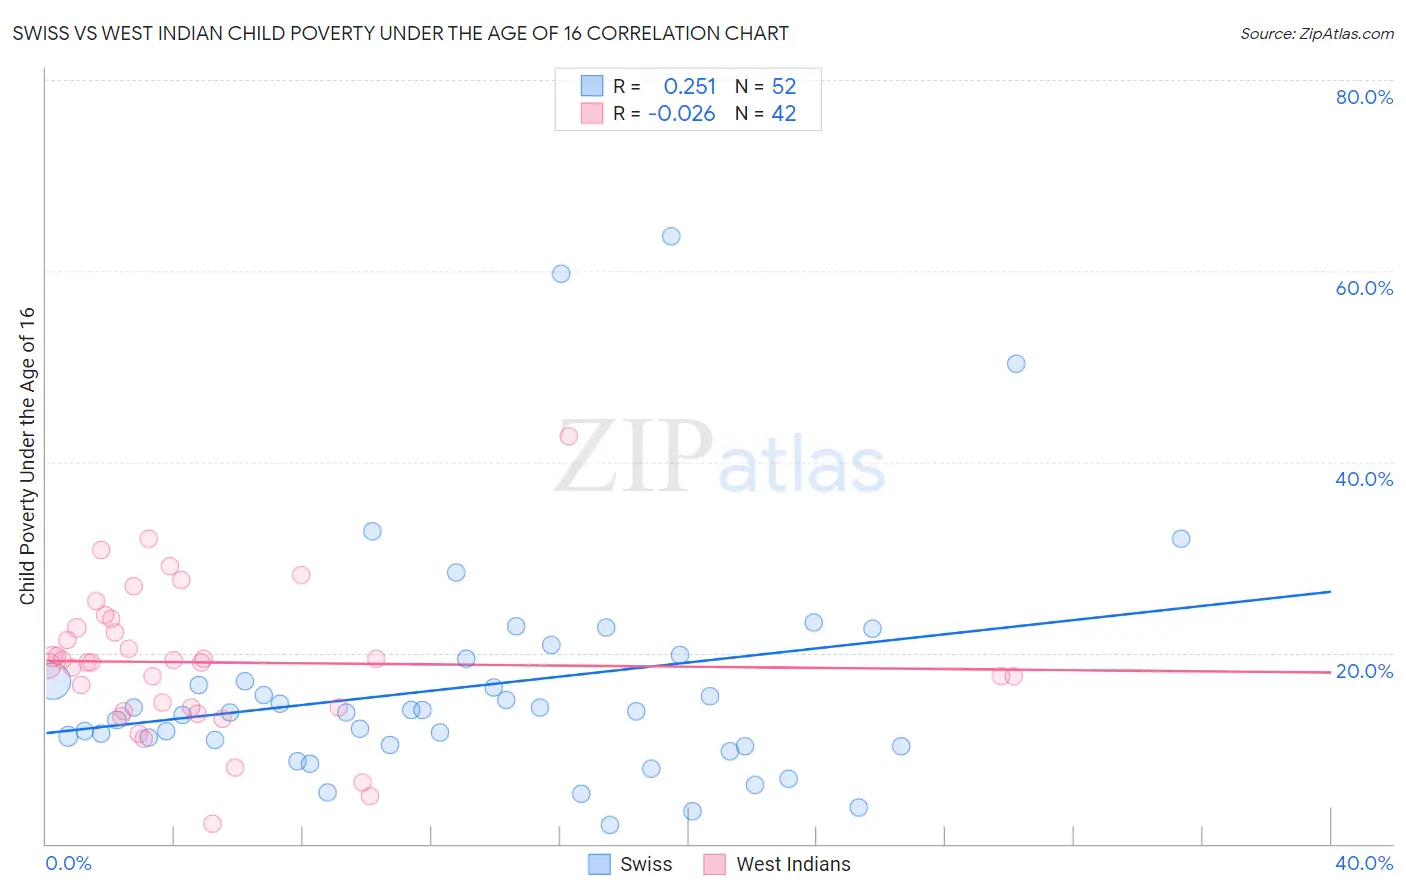 Swiss vs West Indian Child Poverty Under the Age of 16